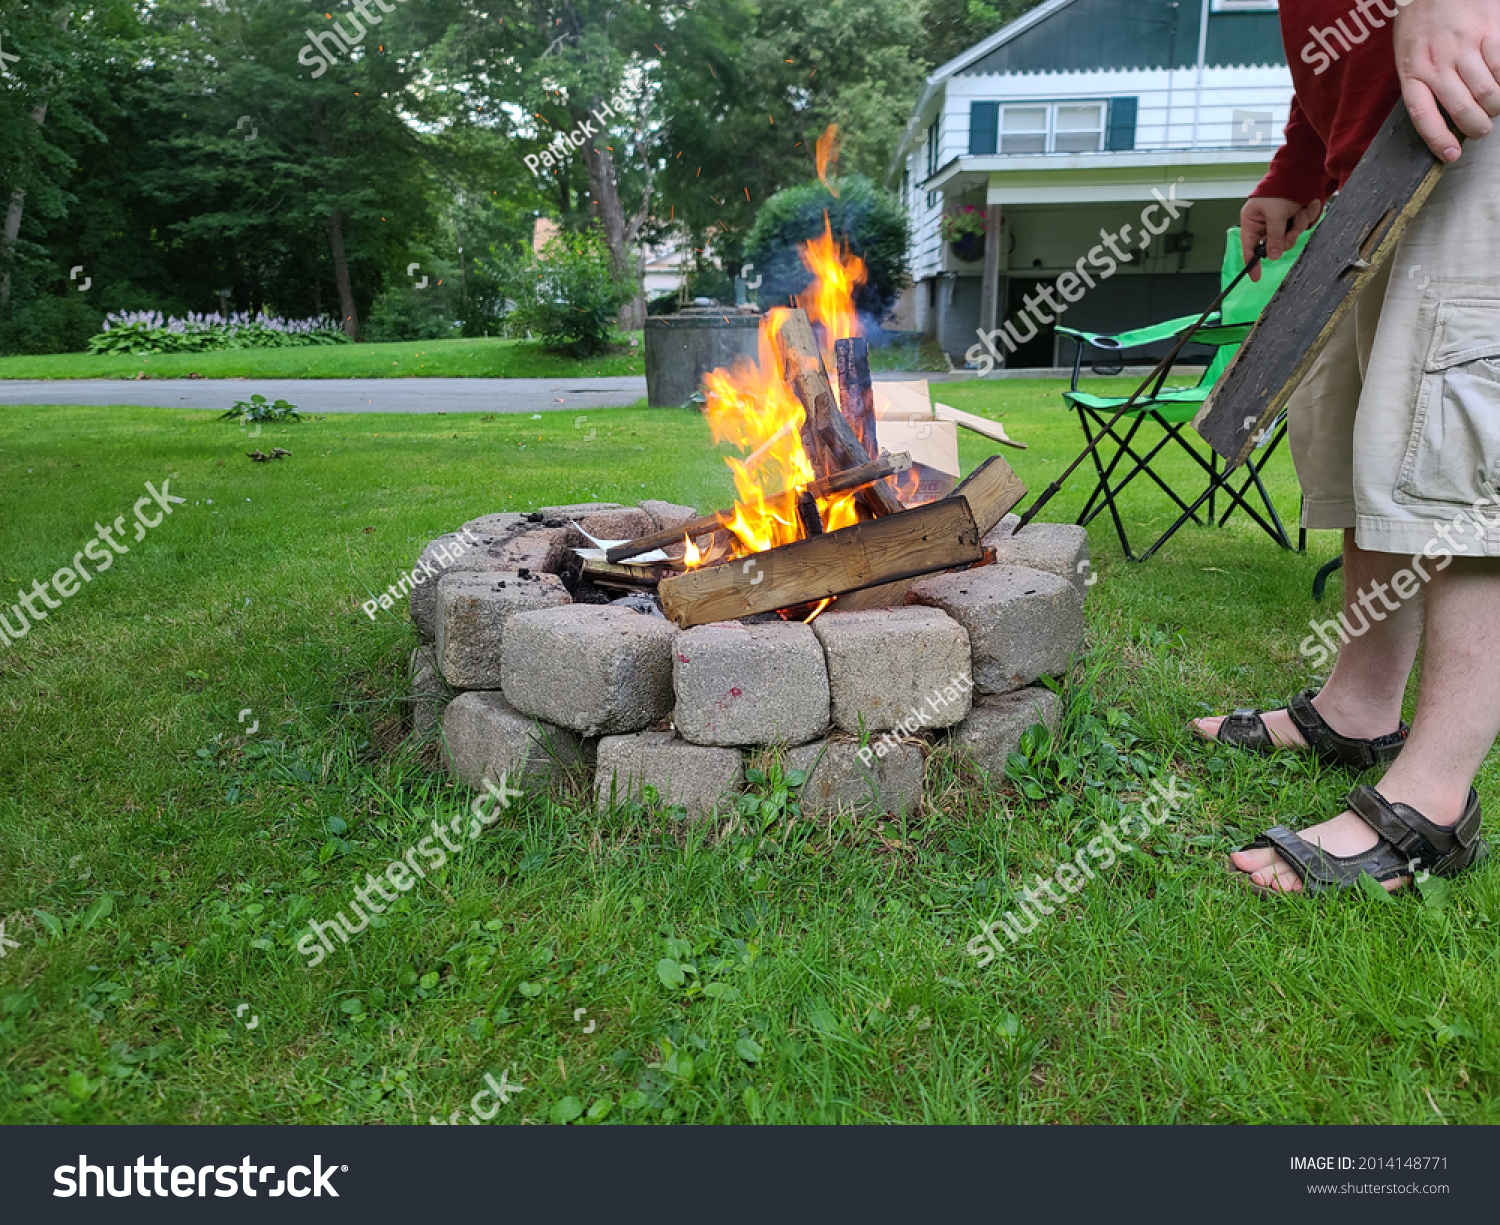 The view of a backyard fire pit. The The fire is lit and is burning shredded paper while igniting boards in the round, cinder block fireplace. #2014148771